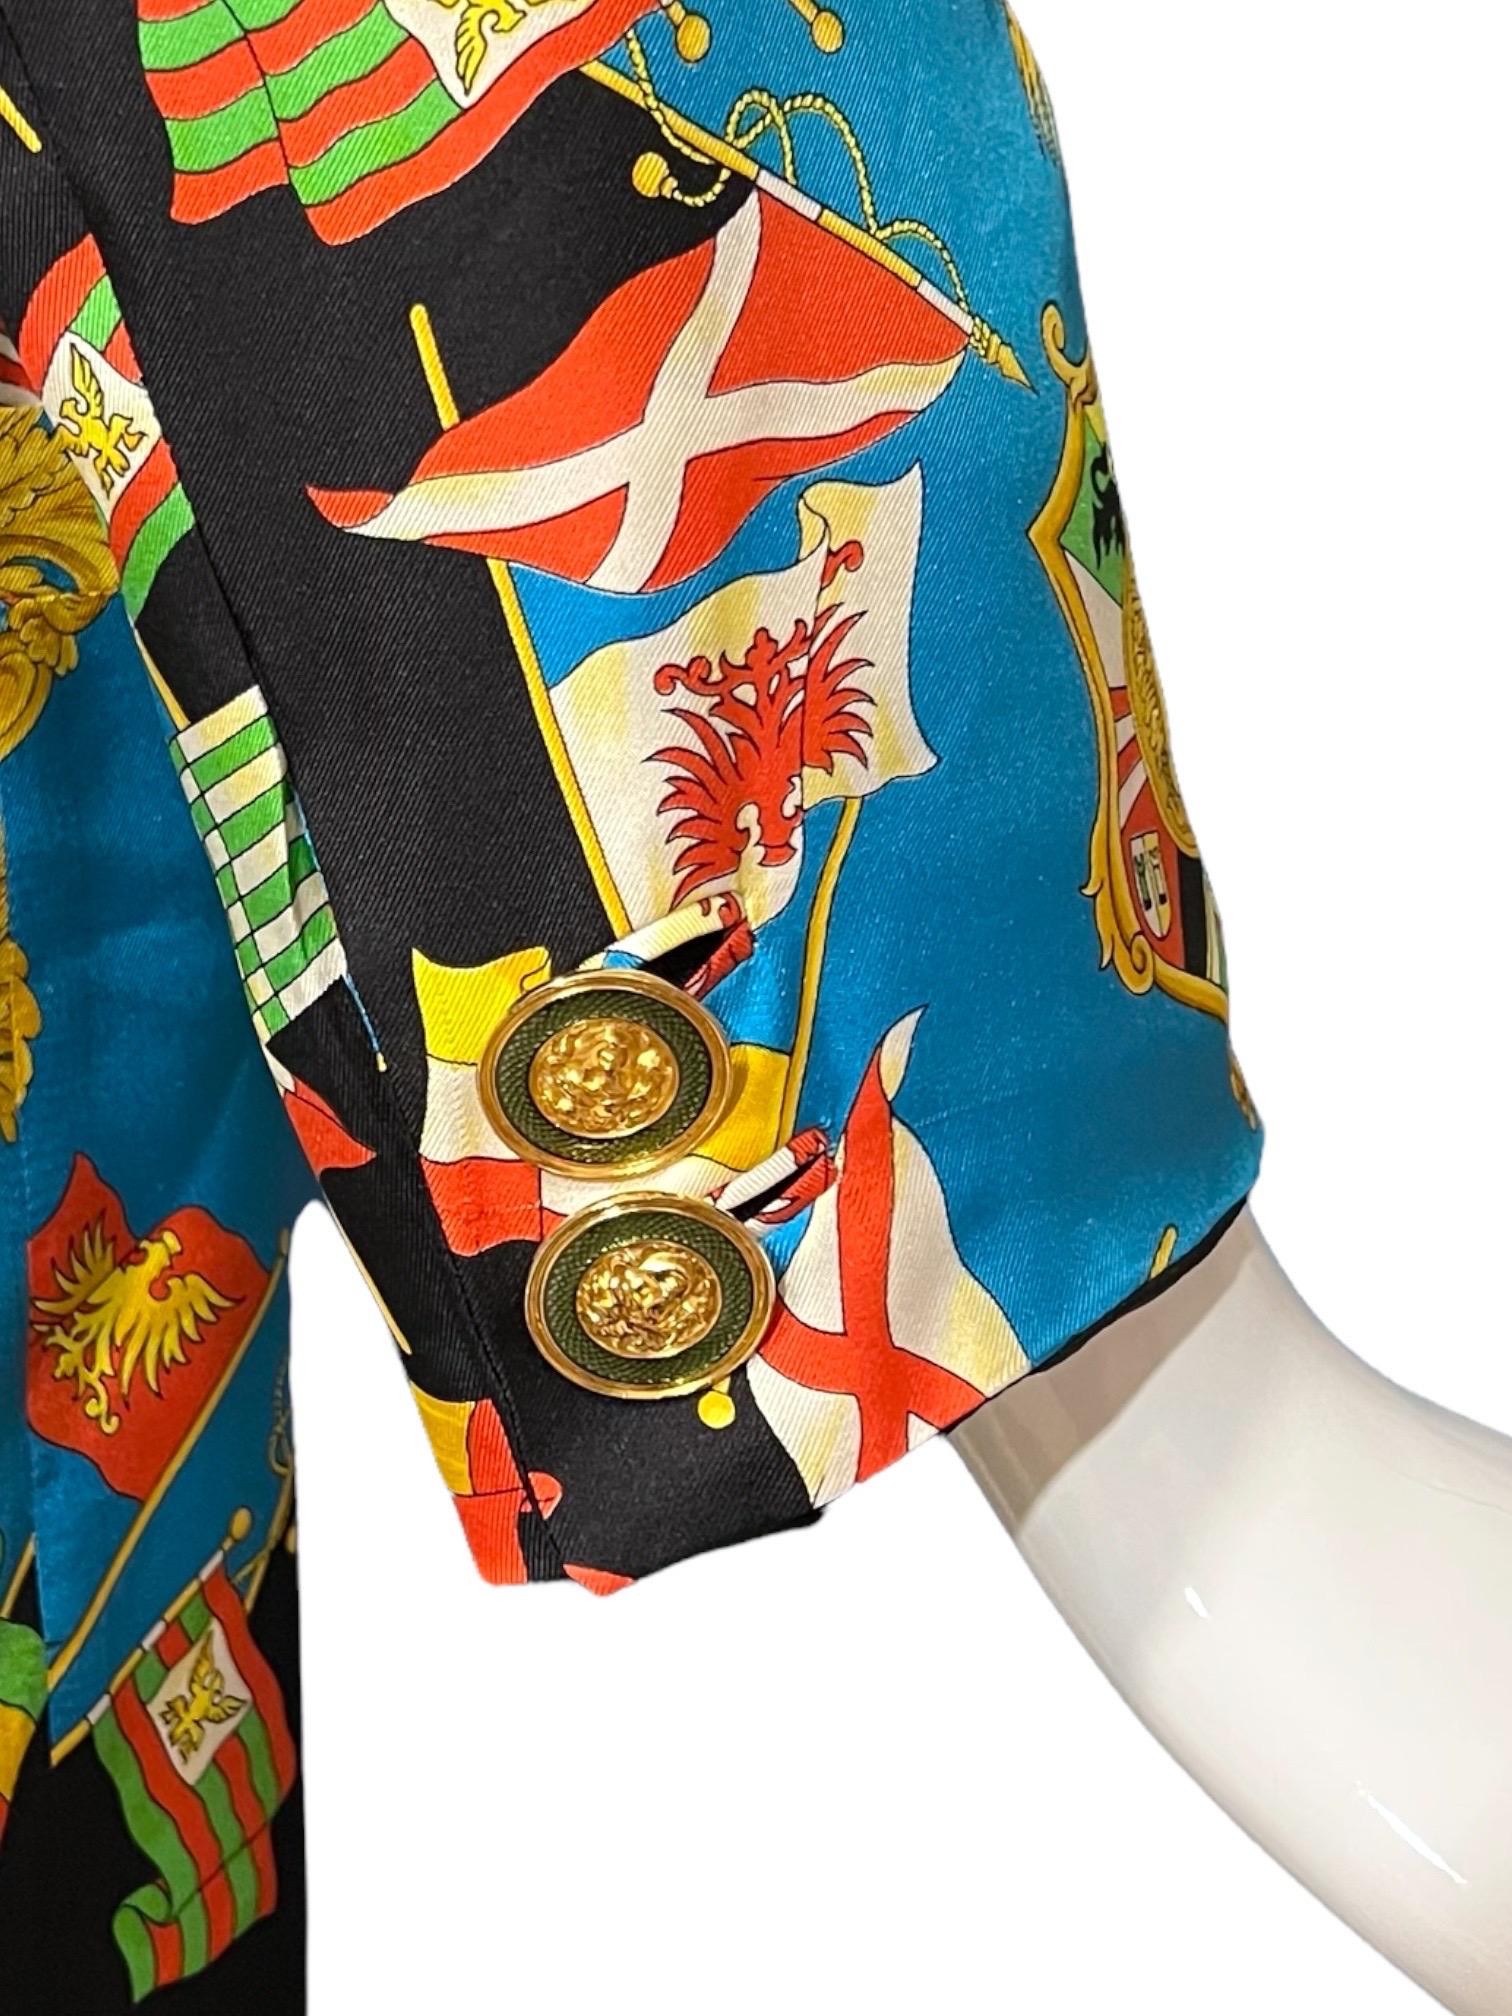 S/S 1993 Gianni Versace Baroque Flags Silk Blazer Jacket Miami Collection  For Sale 7